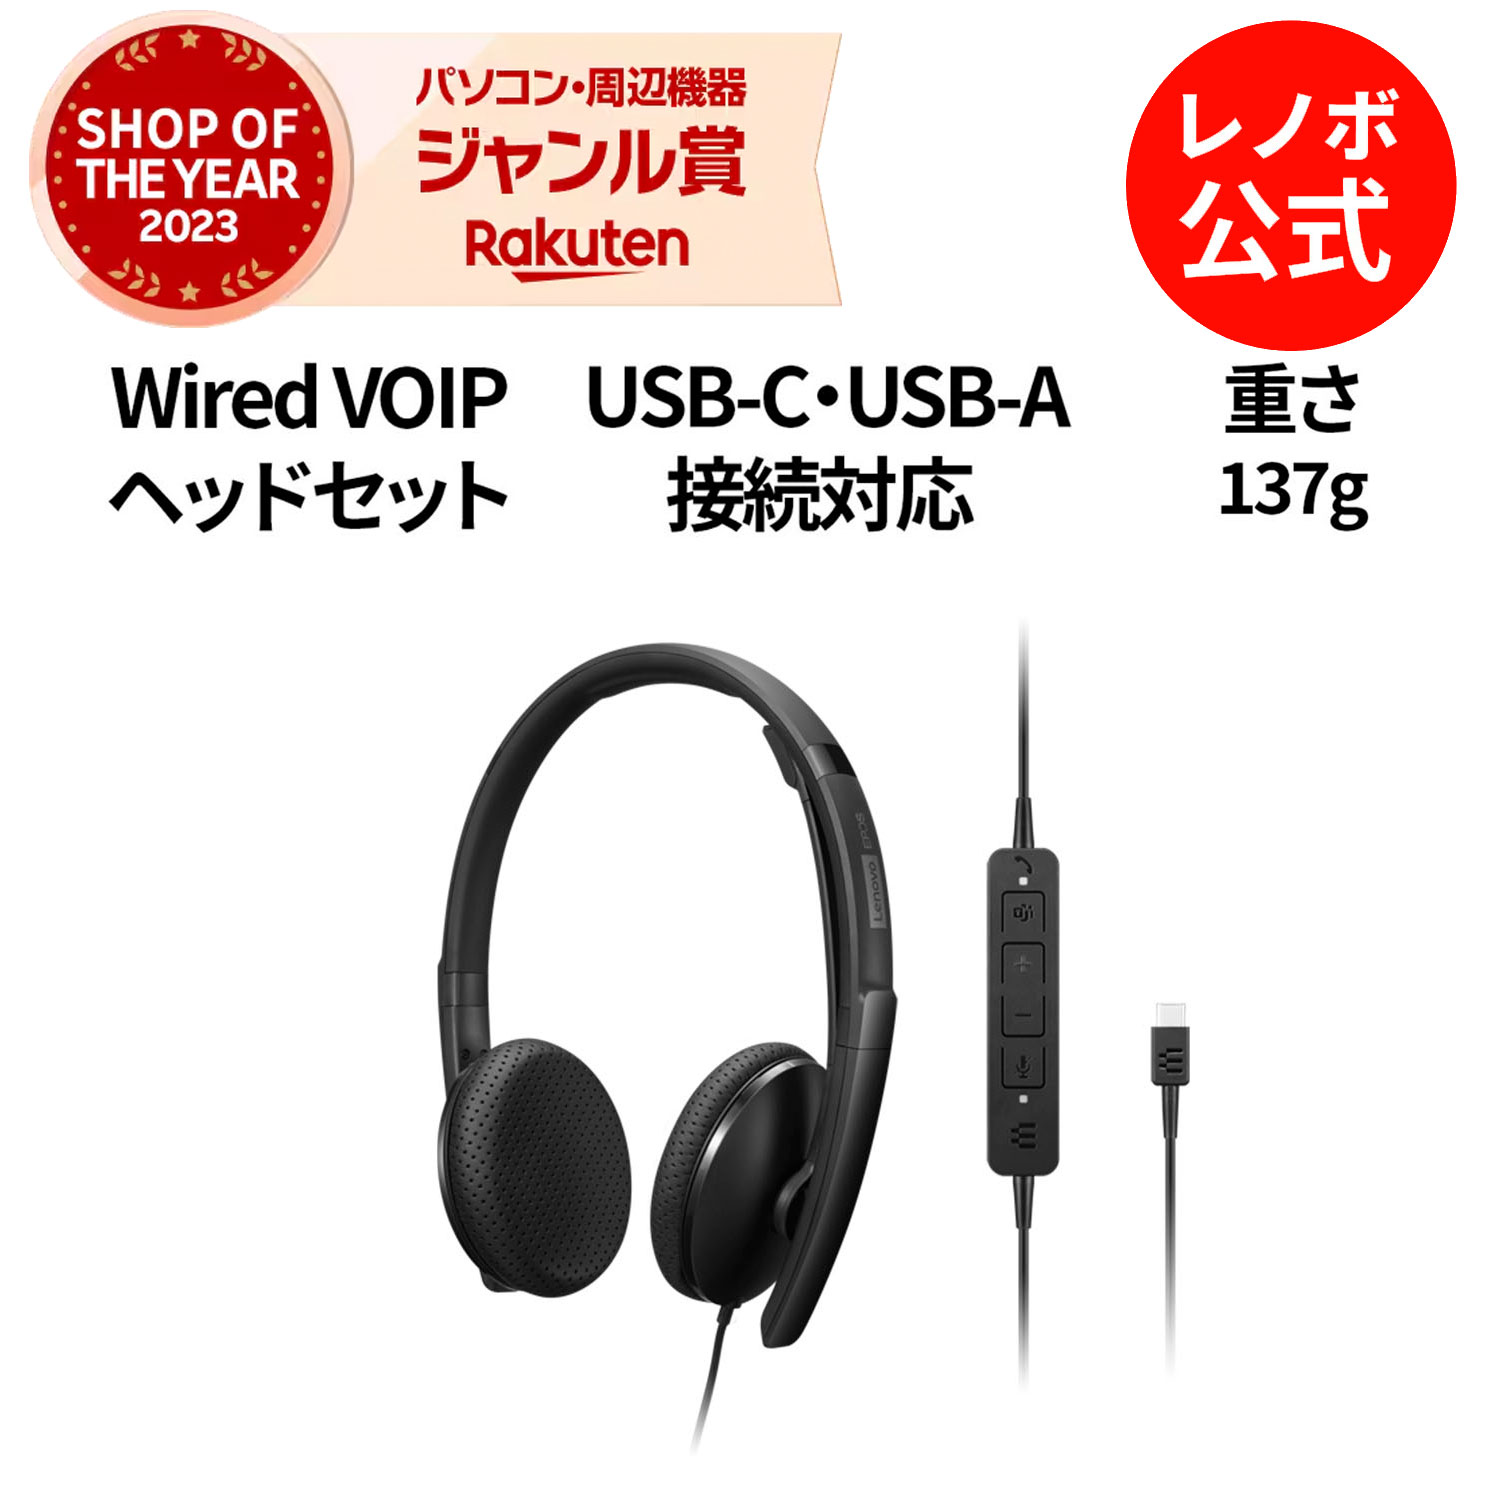 【5/17-5/27】P10倍！【短納期】純正 レノボ 国内正規品 レノボ公式 新生活 Lenovo Wired VOIP ヘッドセット(Teams)(4XD1M45626)